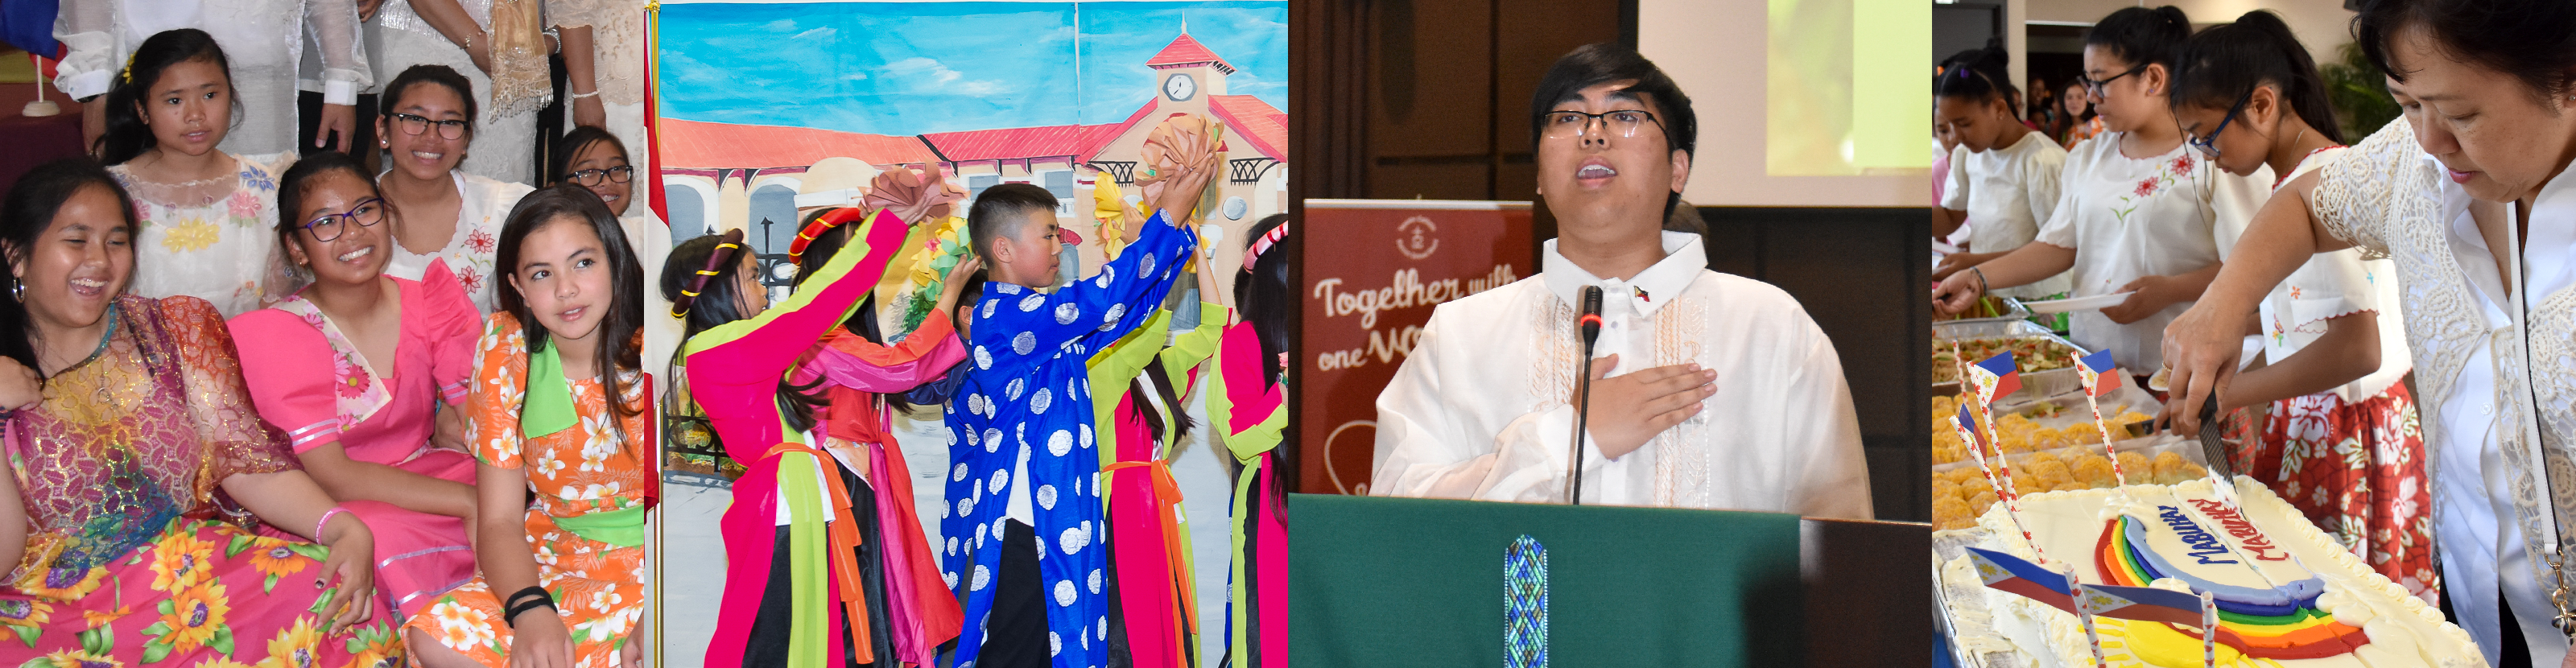 First photo is of students dressed up in traditional Filipino dress for the Filipino Cultural Heritage Month Mass and Expose. Second photo is of students performing on stage in traditional Filipino dress. Third photo is a of a student reciting a prayer at the podium. Fourth photo is of students, staff and parents picking traditional Filipino food to eat from the buffet spread.